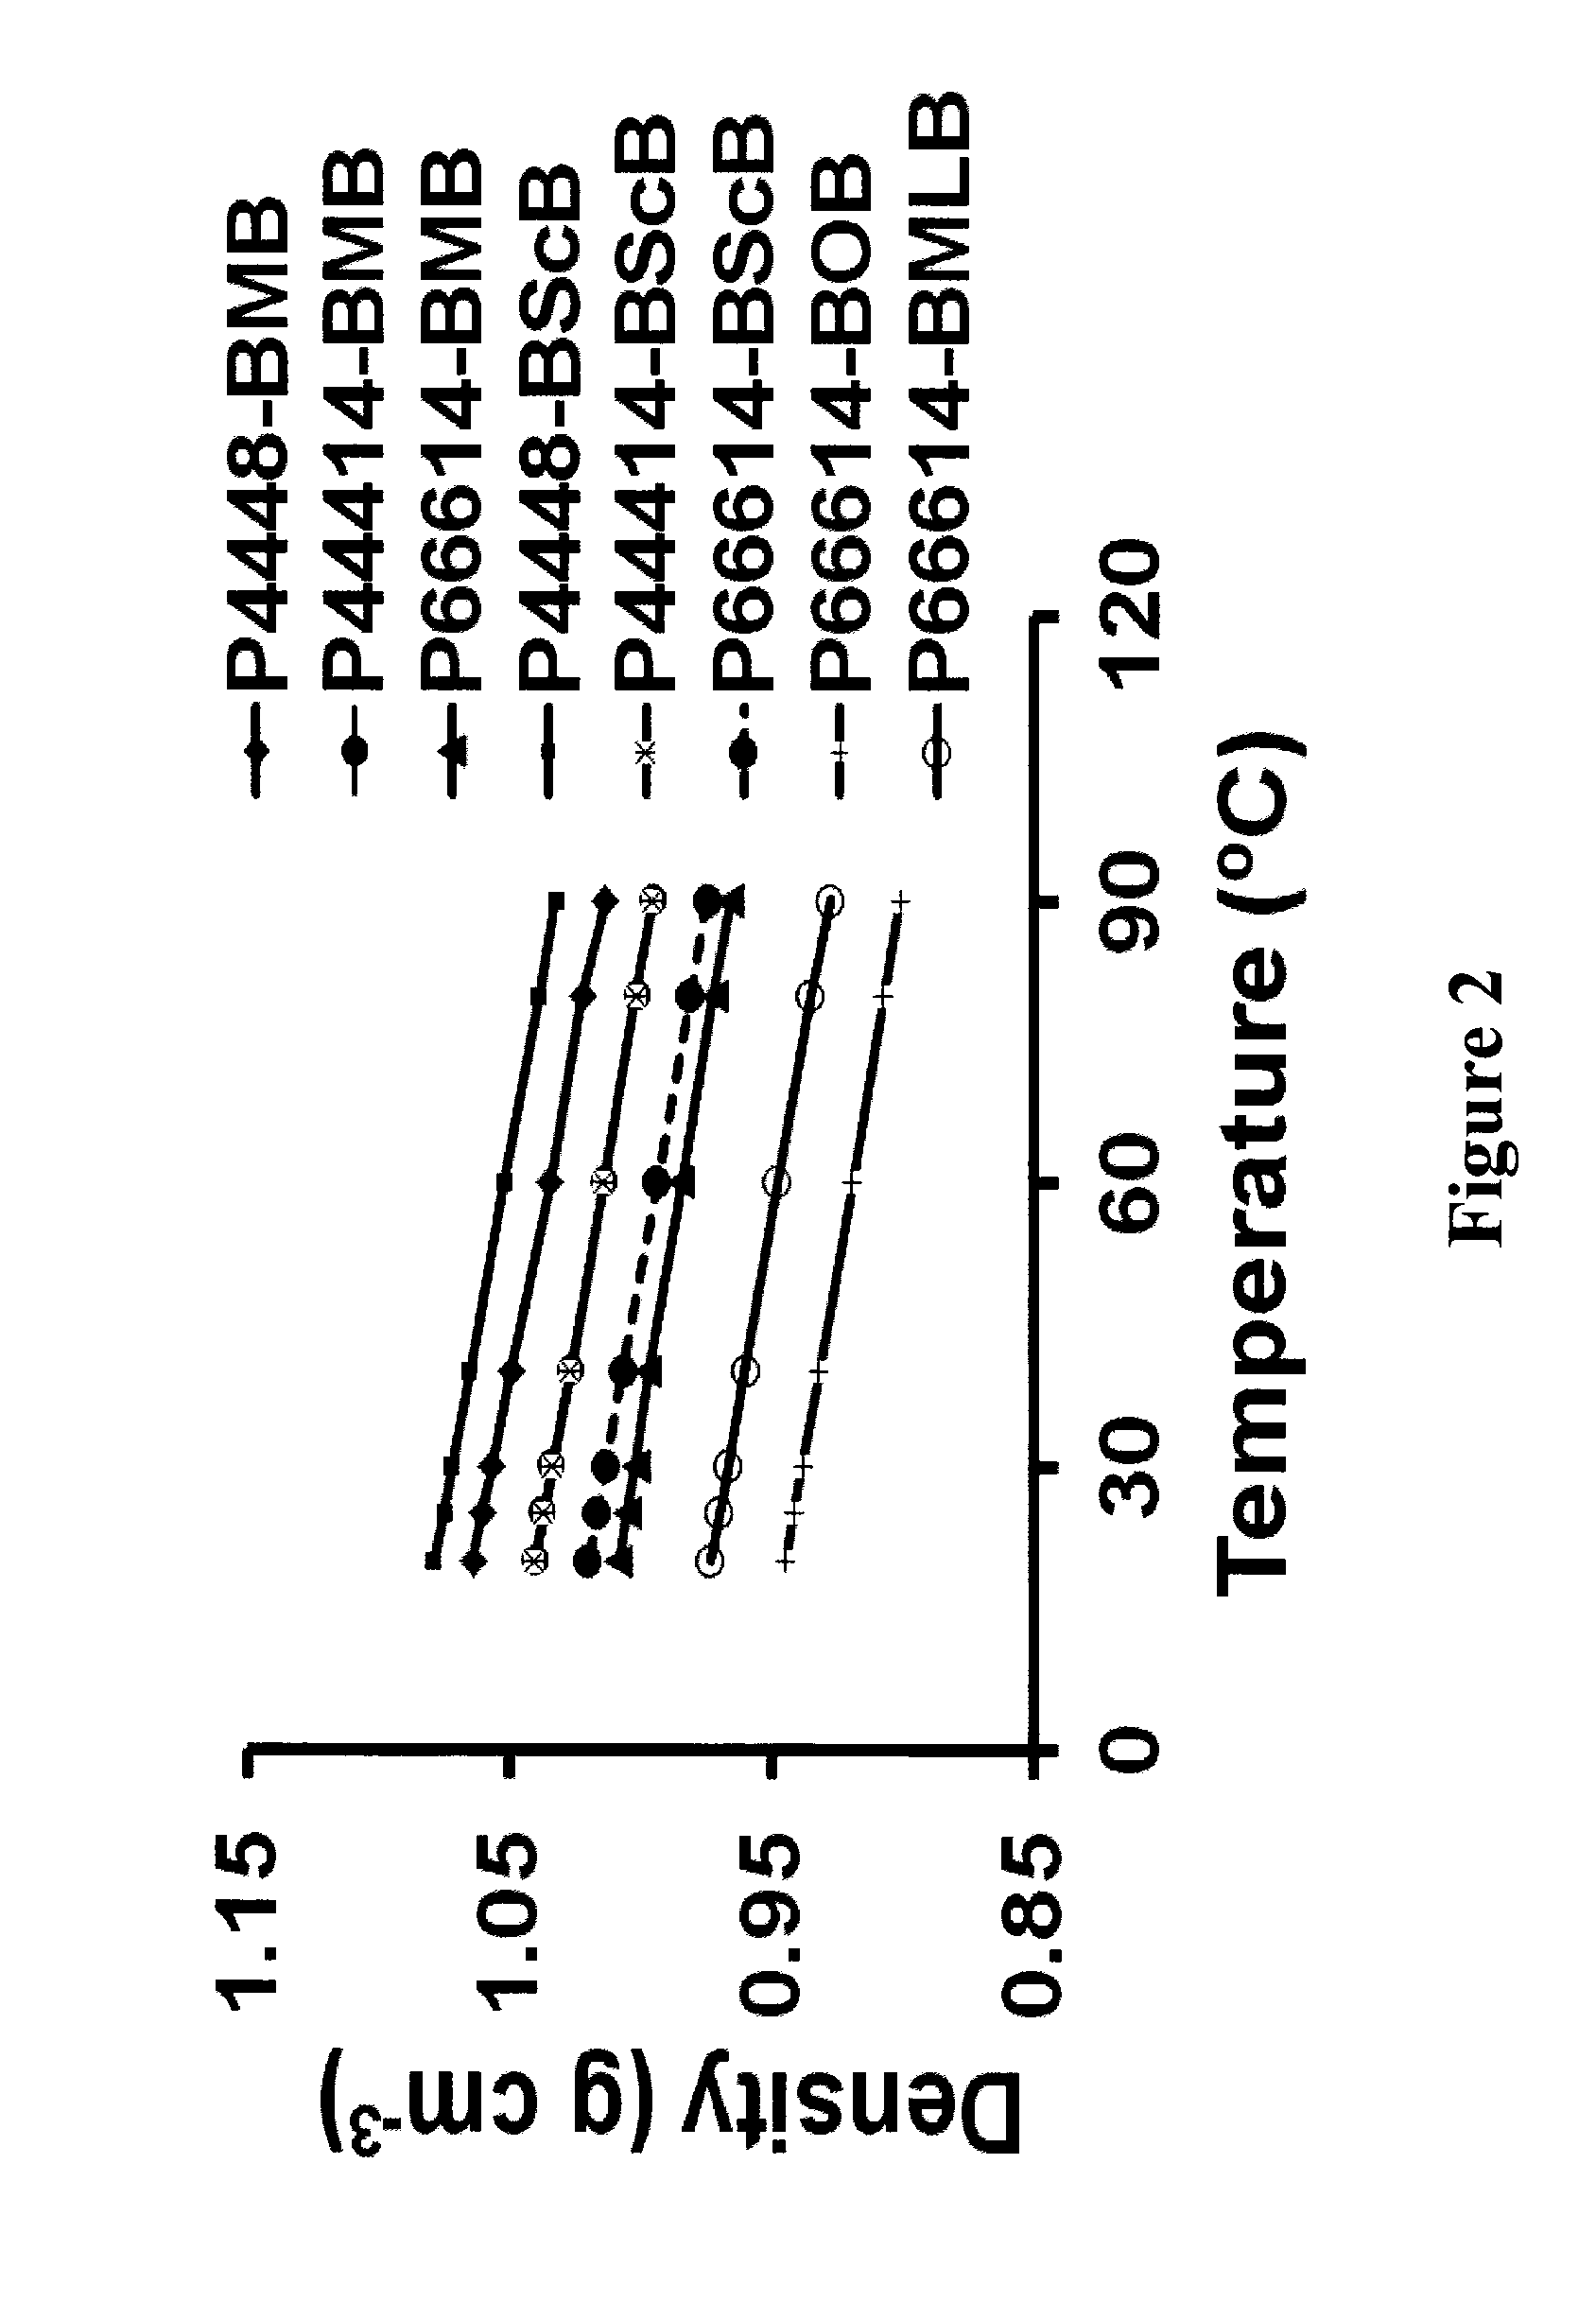 Ionic-liquid-based lubricants and lubrication additives comprising ions